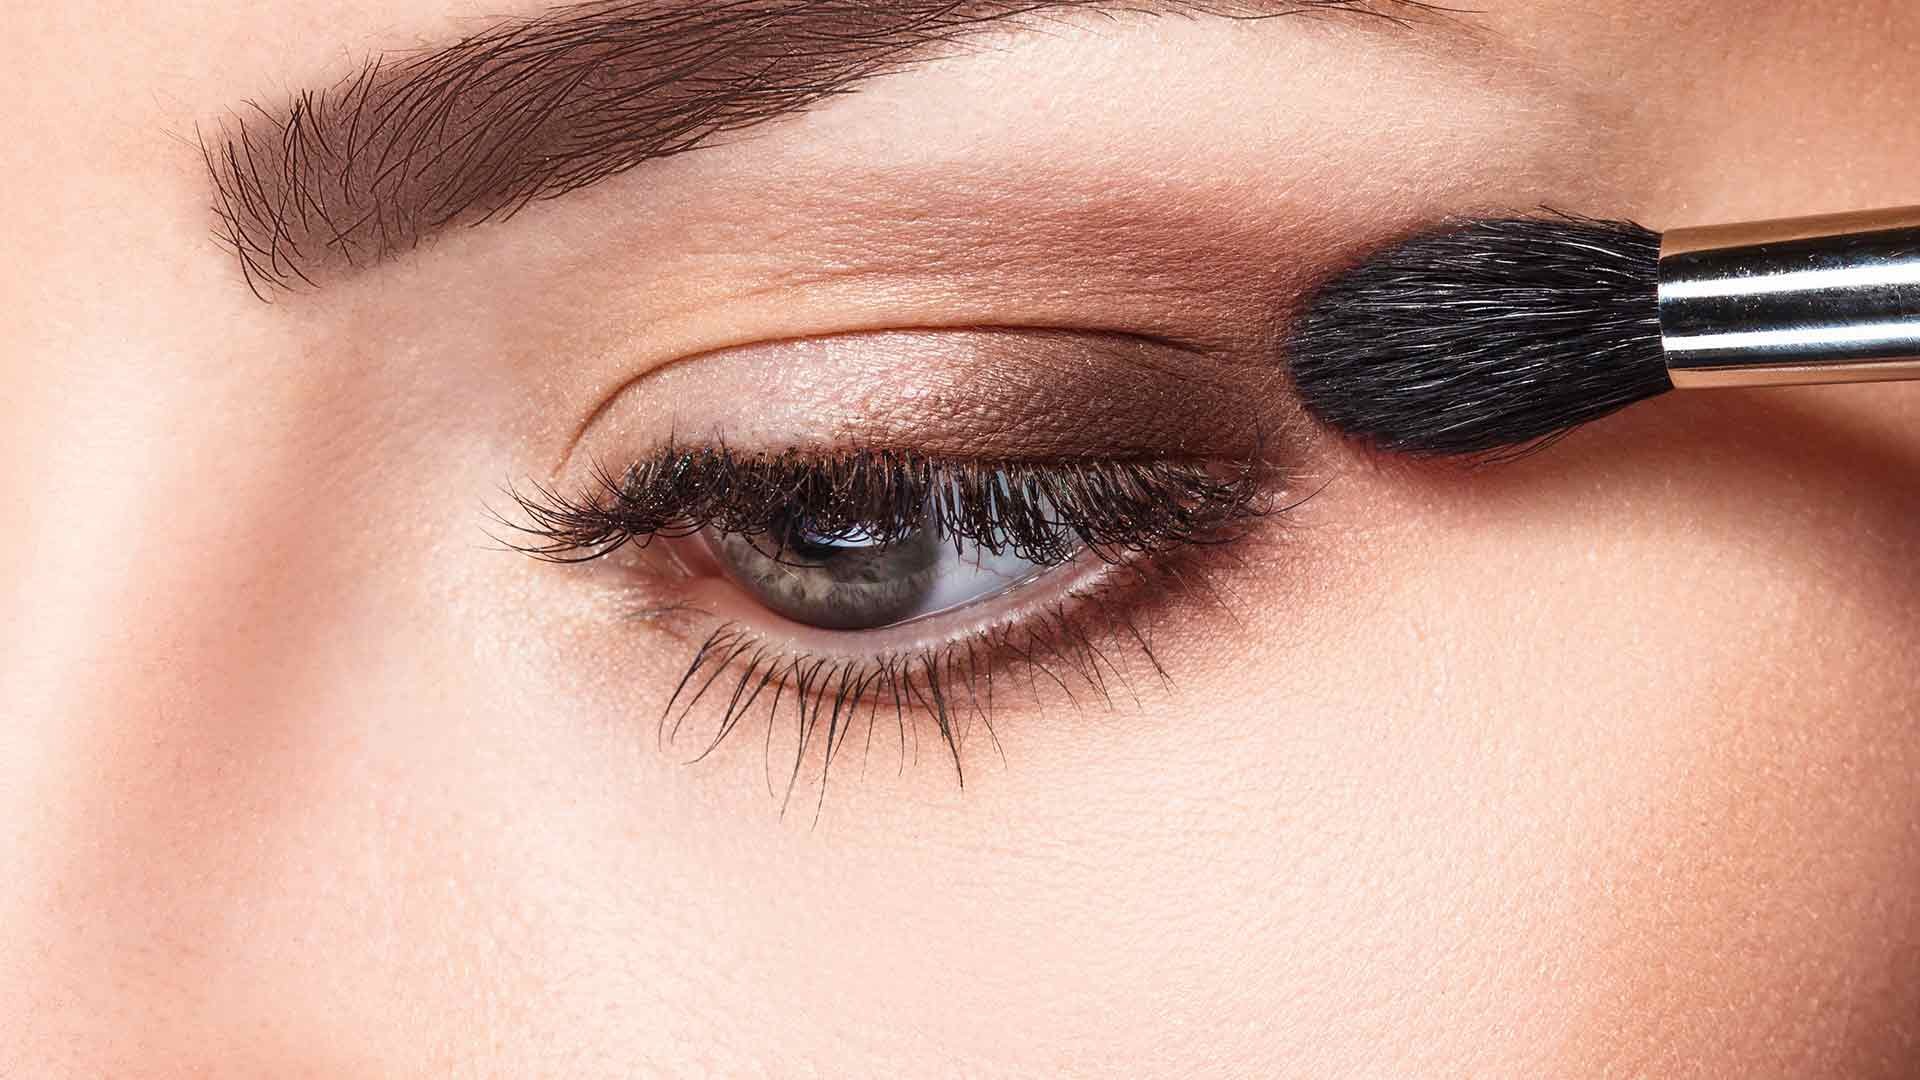 Loreal Paris Article How To Apply Eye Makeup Tutorial And Tips D